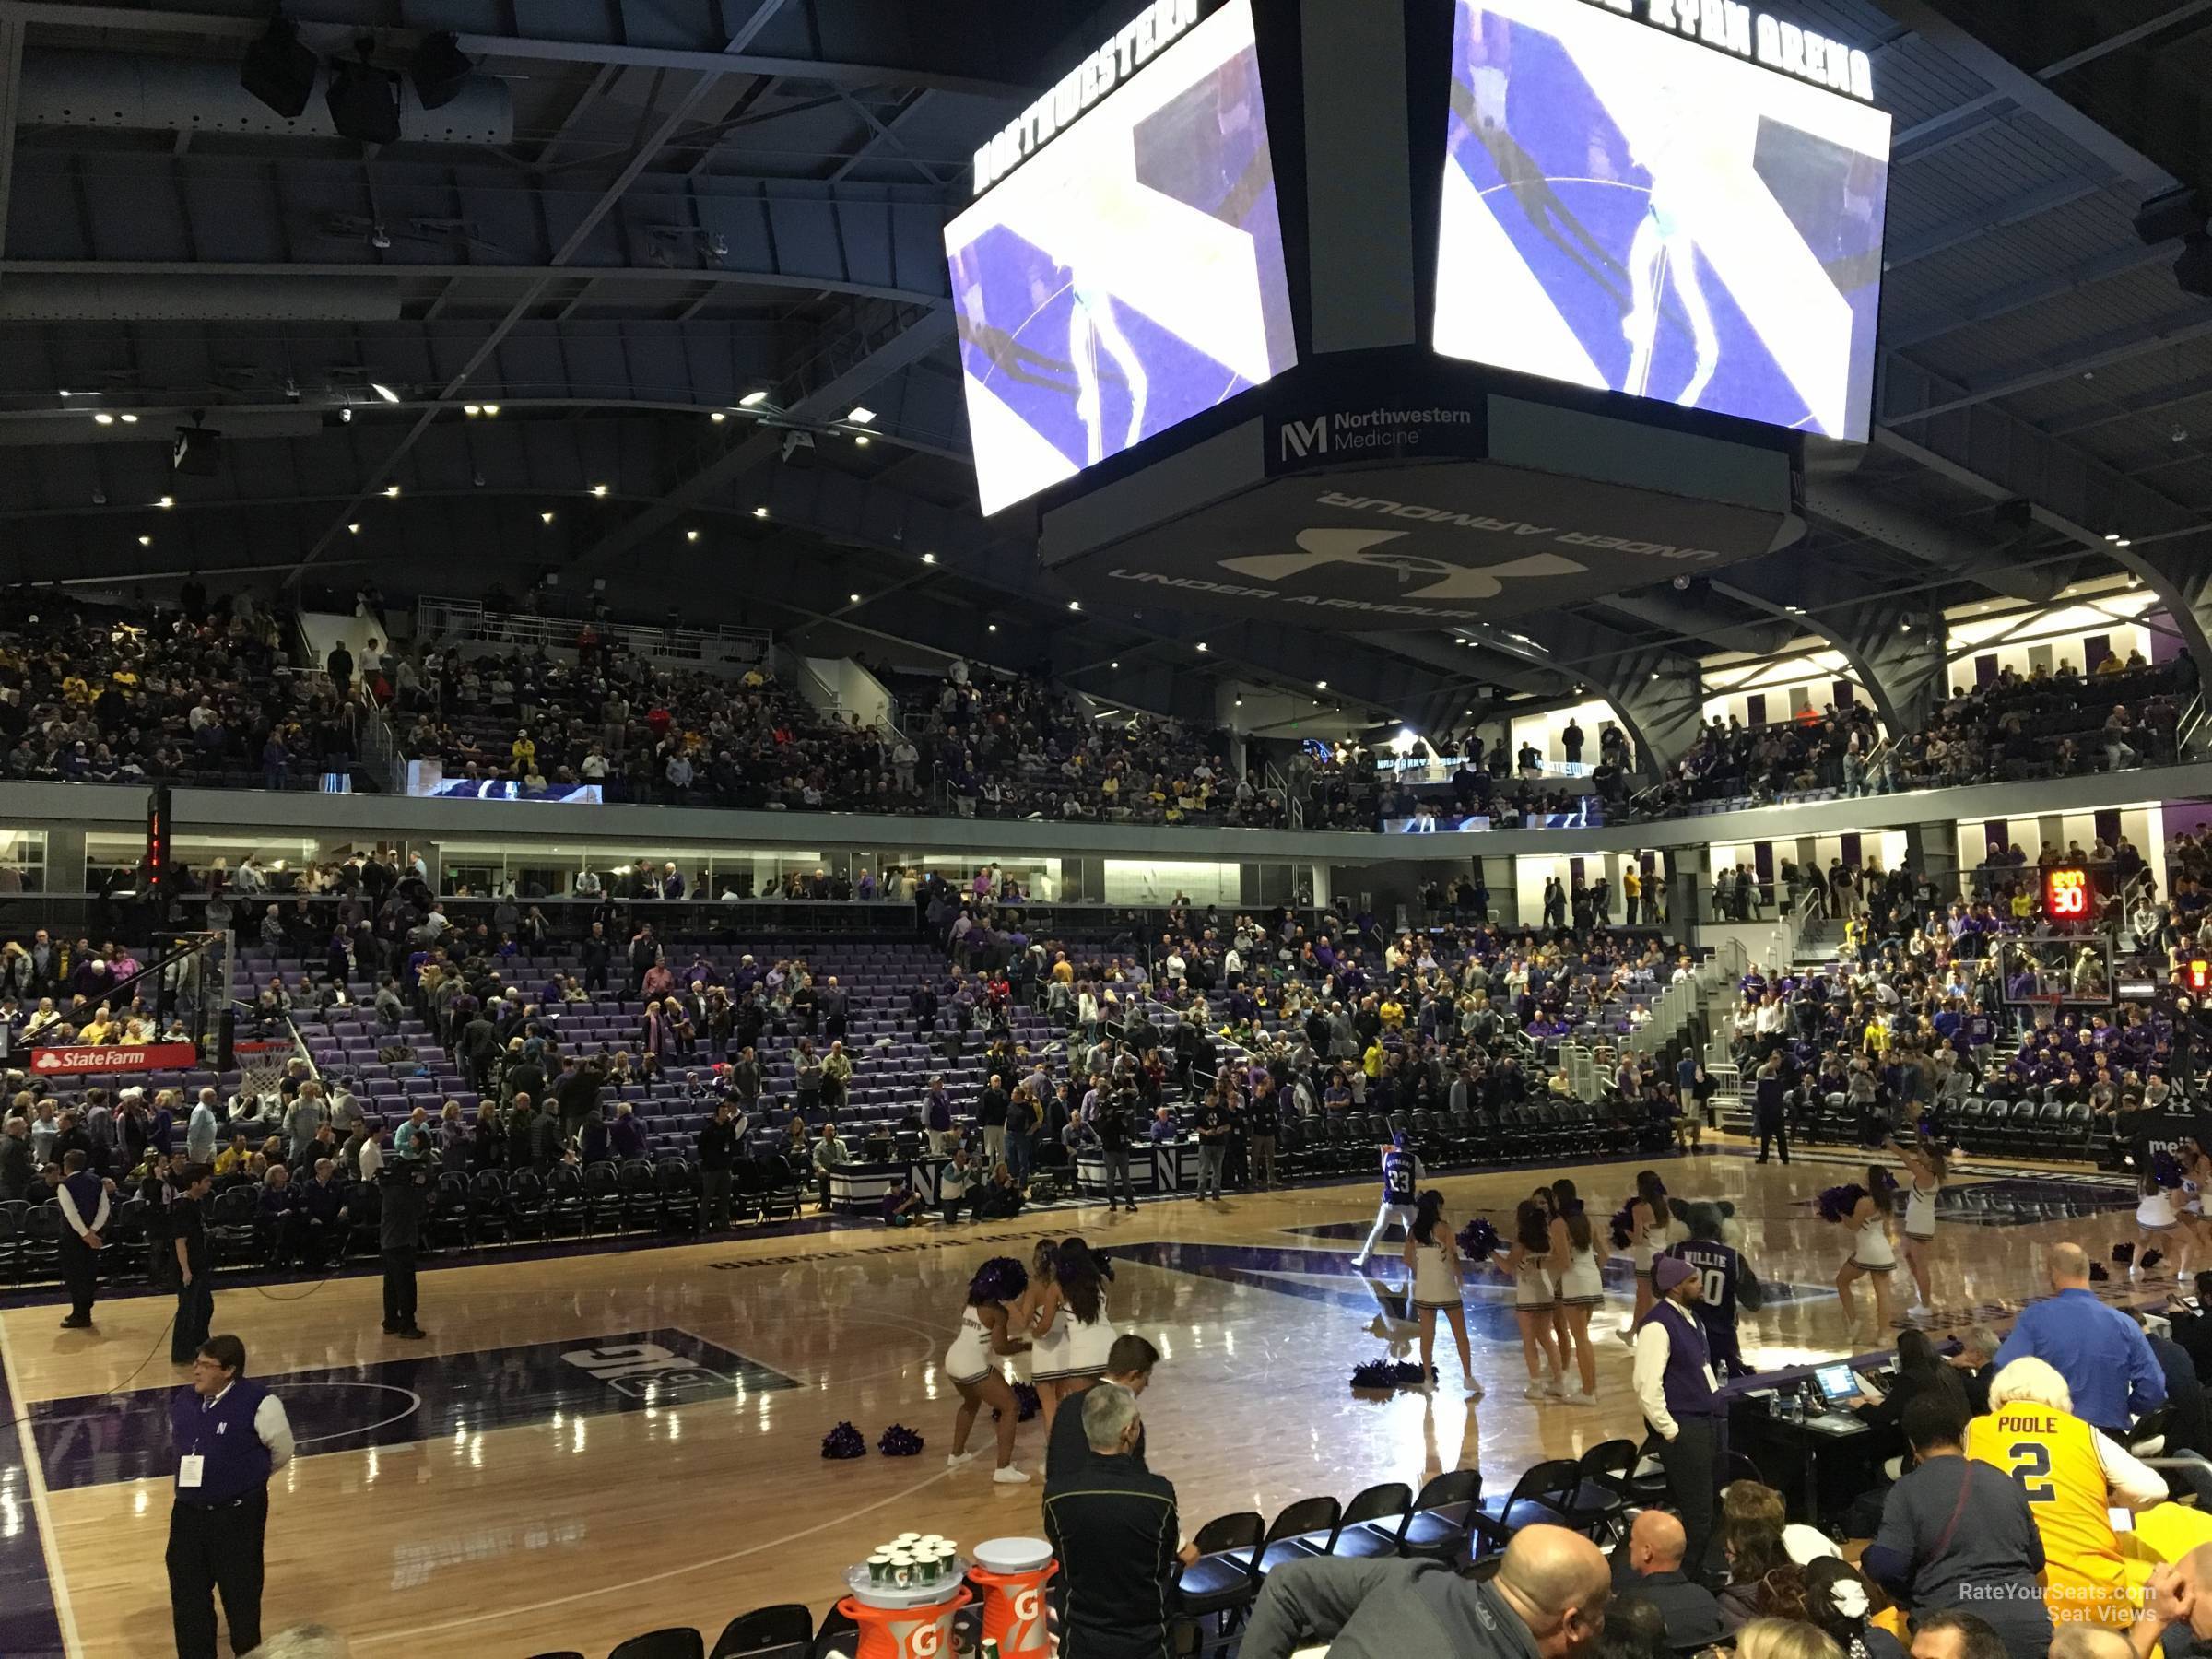 section 109, row 5 seat view  - welsh-ryan arena